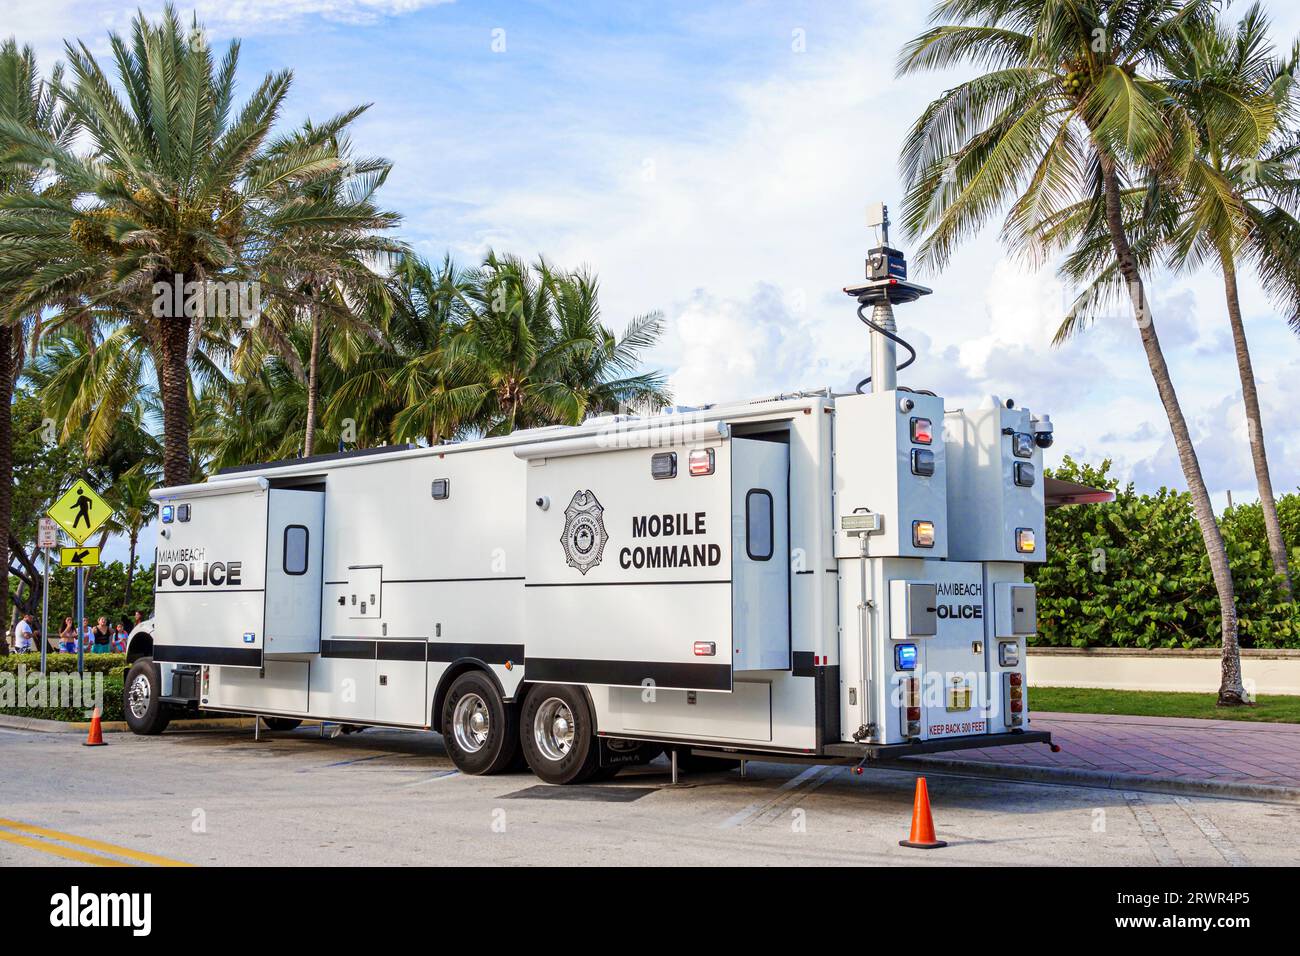 Miami Beach Florida,Ocean Terrace,Fourth 4th of July Independence Day event,police mobile command station Stock Photo